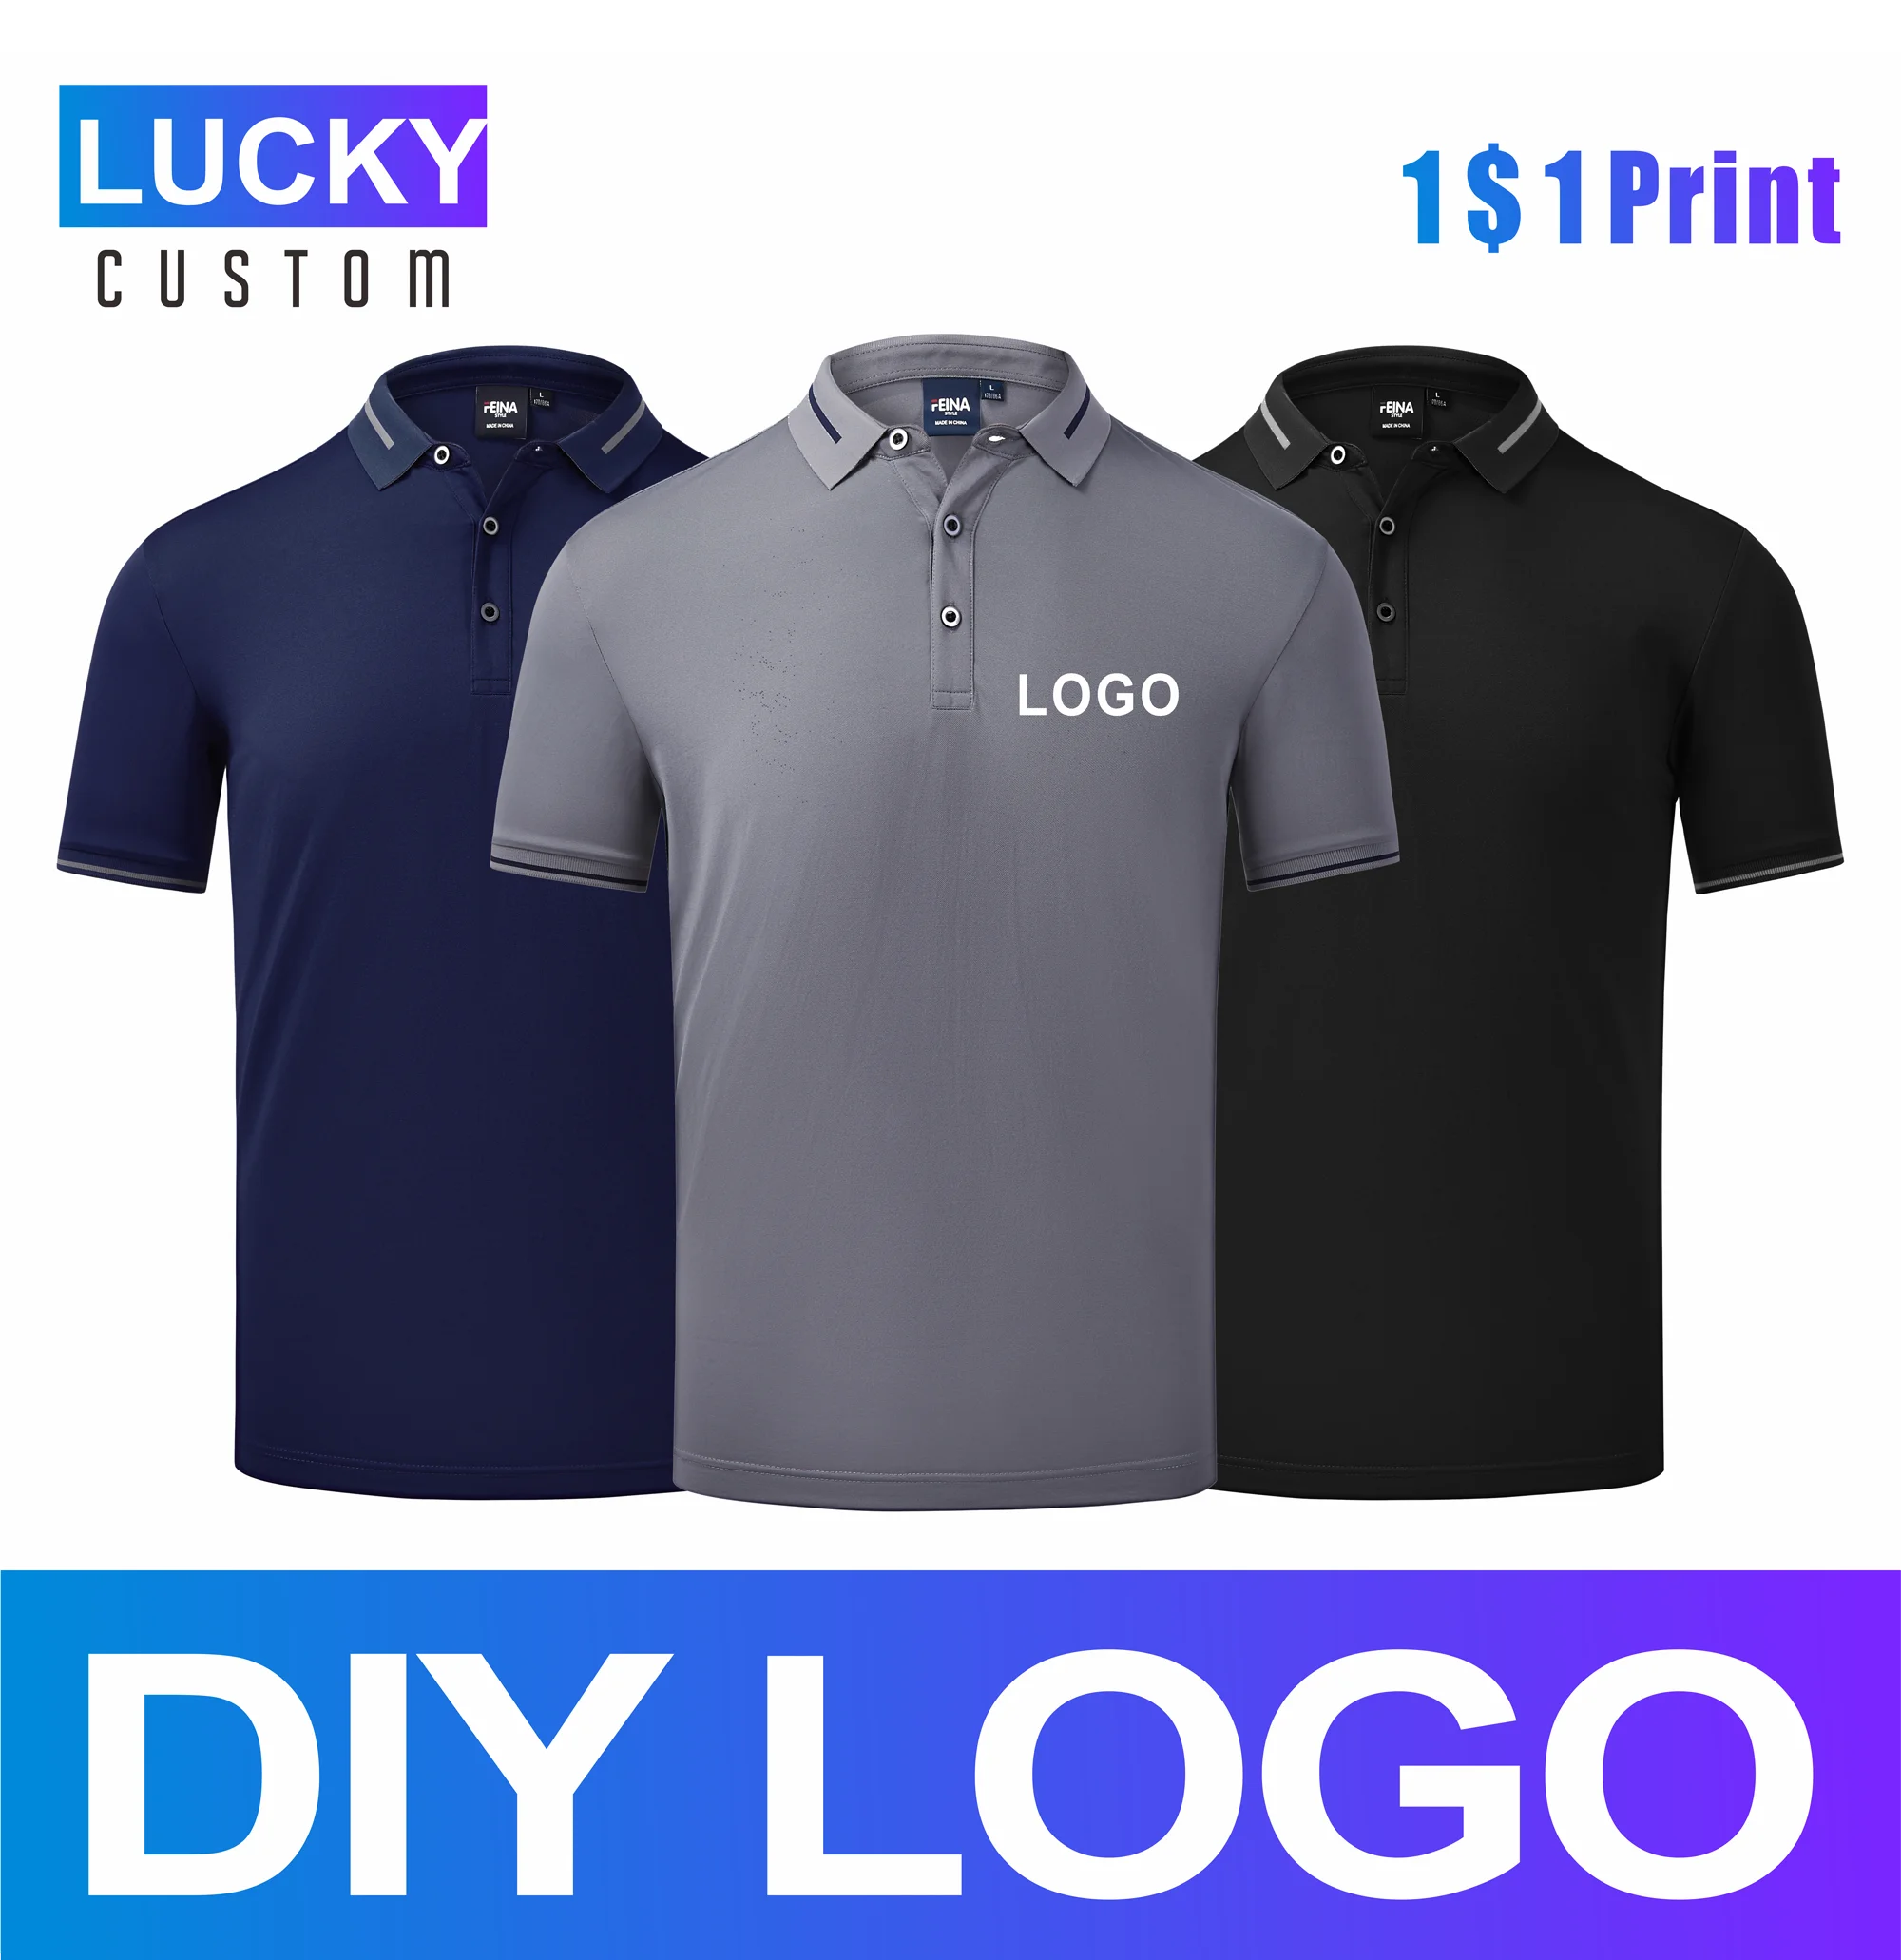 Men's Handsome Polo Suit Business Casual Short Sleeves Custom Printed Embroidery Logo Work Shirt Casual Embroidery 4xl